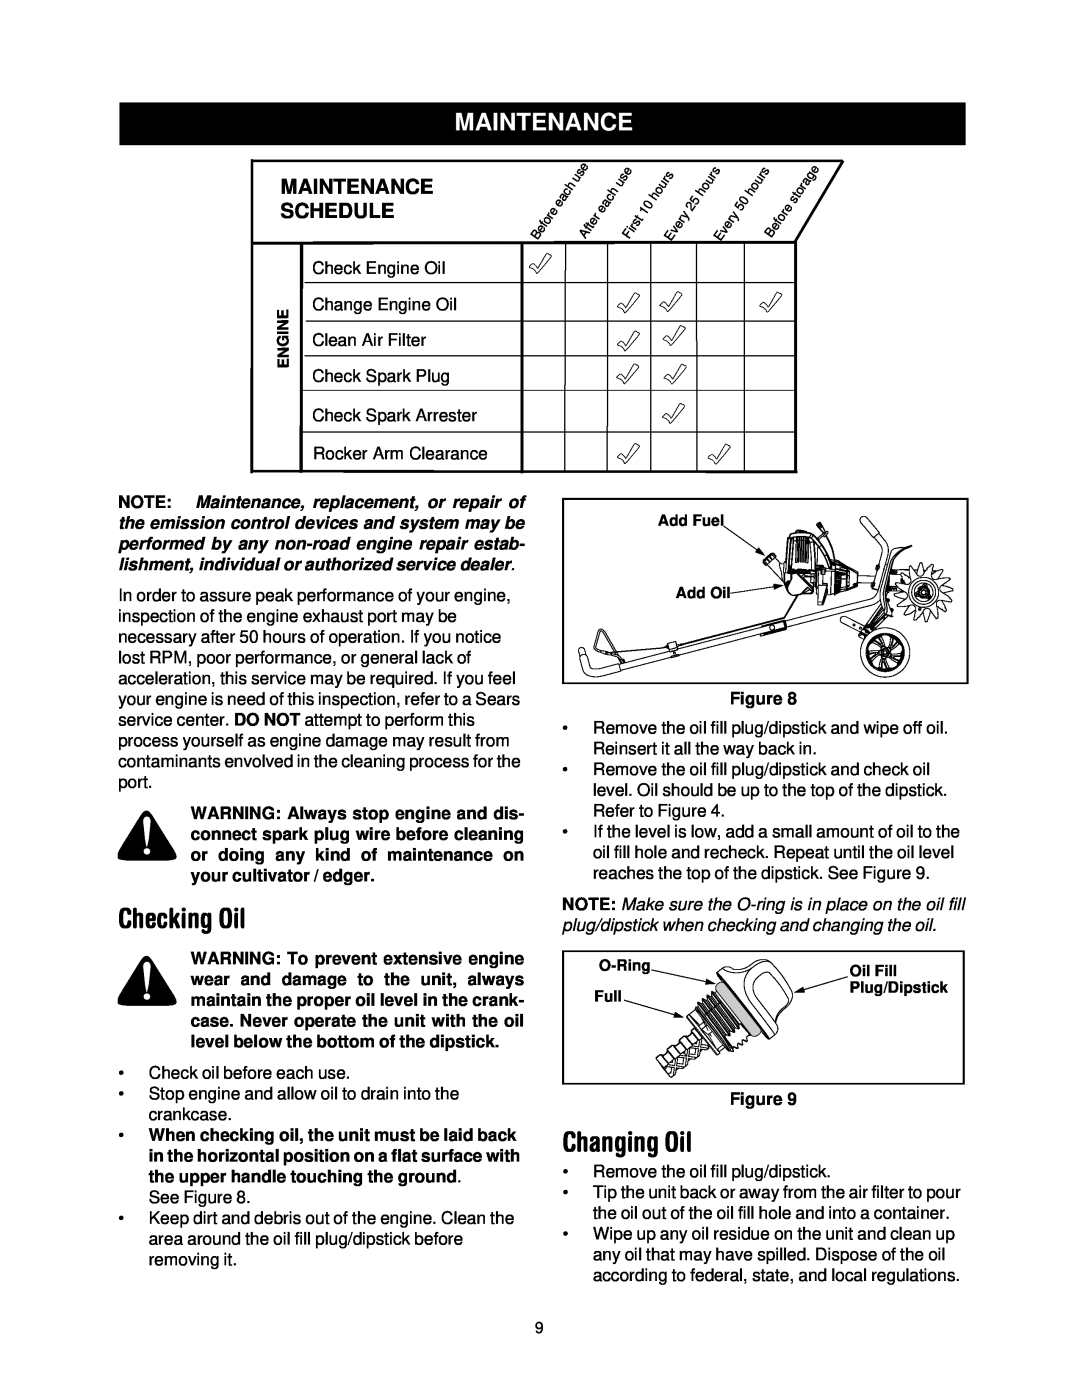 Craftsman 316.2927 manual Checking Oil, Changing Oil, Maintenance Schedule 